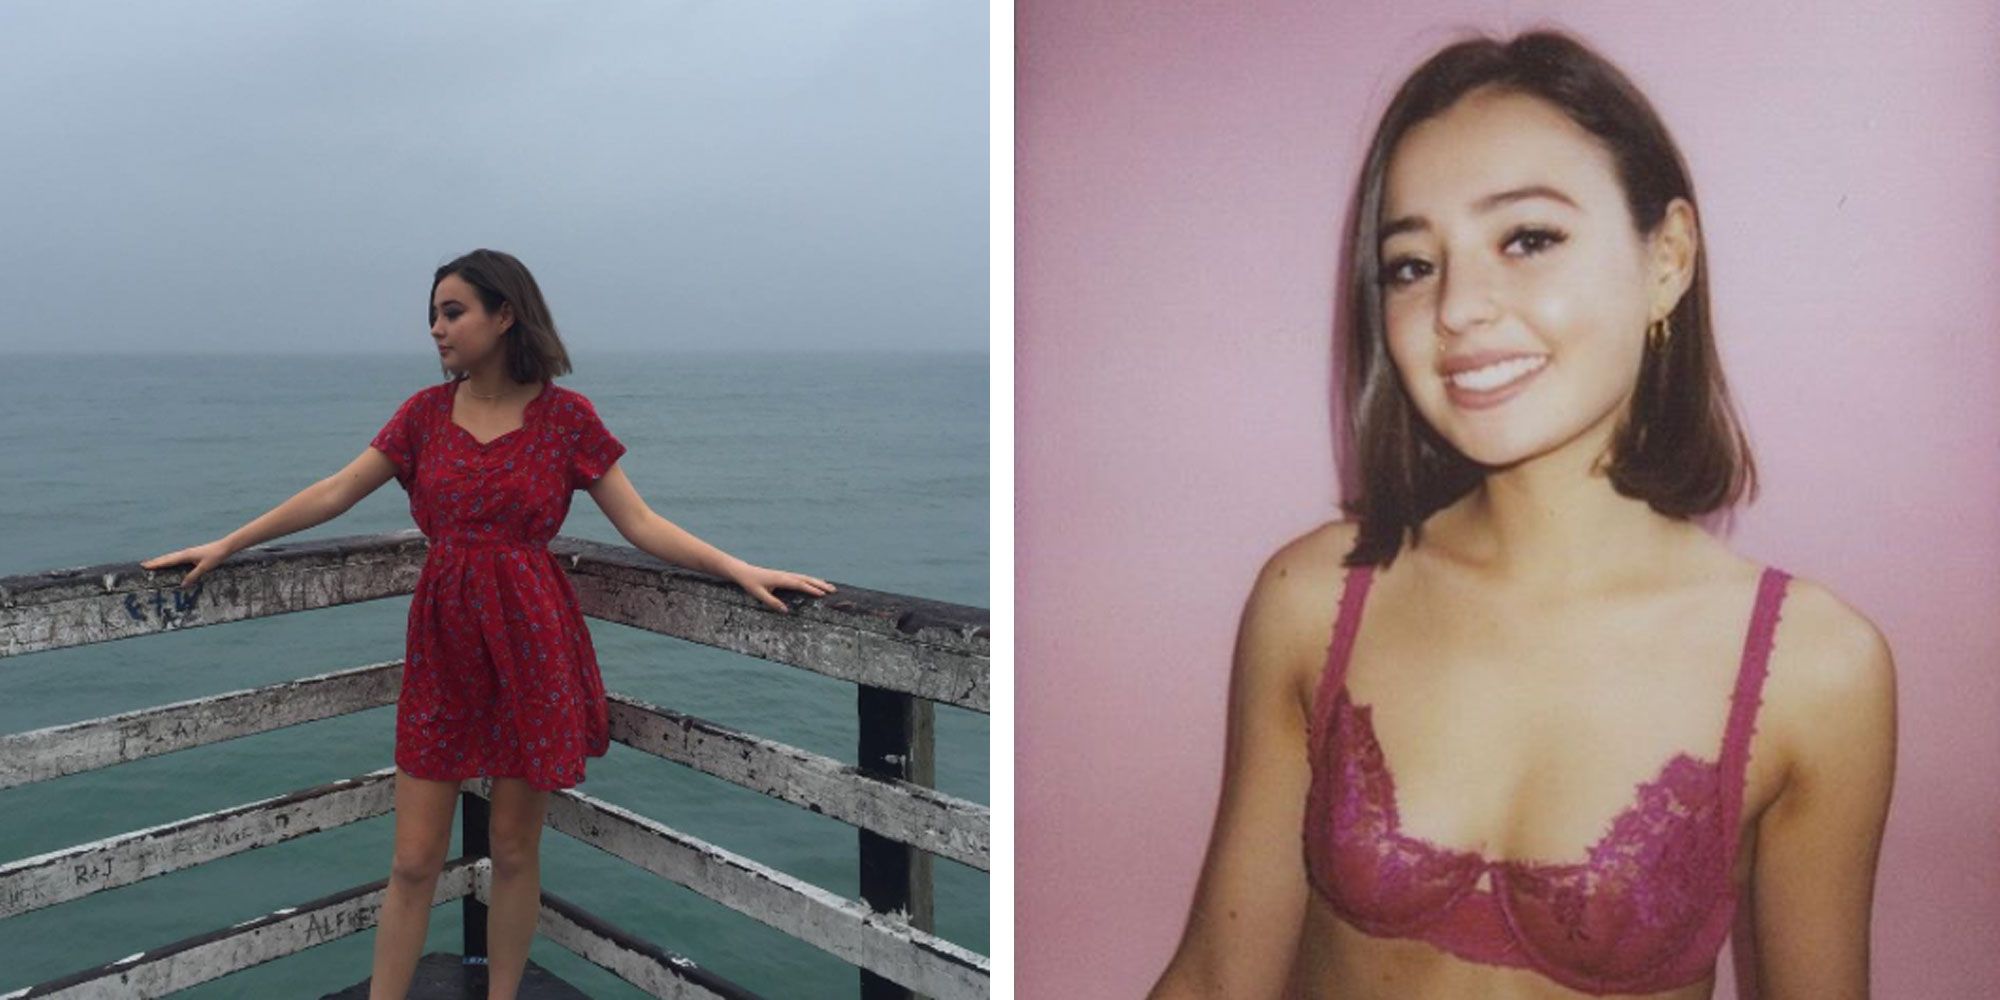 20-Year-Old Instagram Star Eileen Kelly Refutes Claim That Her Account Promotes Sex With Young Girls